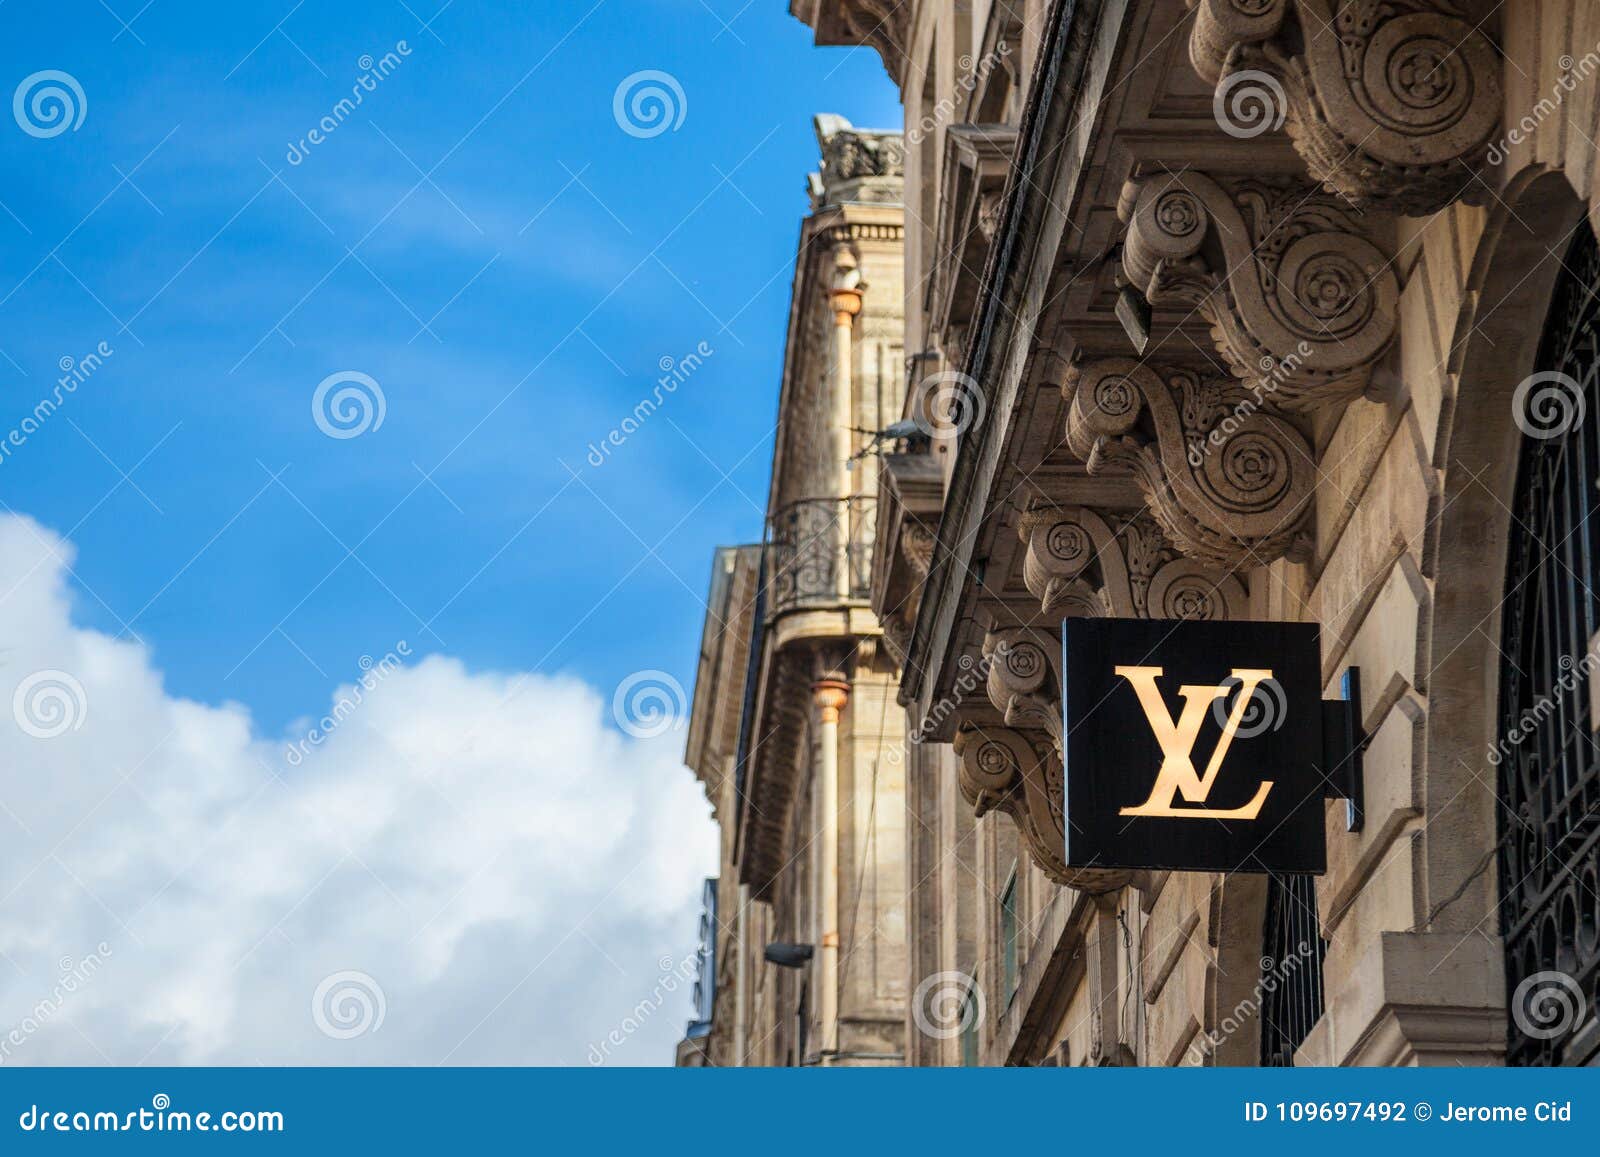 Bordeaux , Aquitaine / France - 11 25 2019 : Louis Vuitton Logo Store Sign  Luxury Brand Shop Handbags Luggage Editorial Stock Image - Image of city,  expensive: 165062019